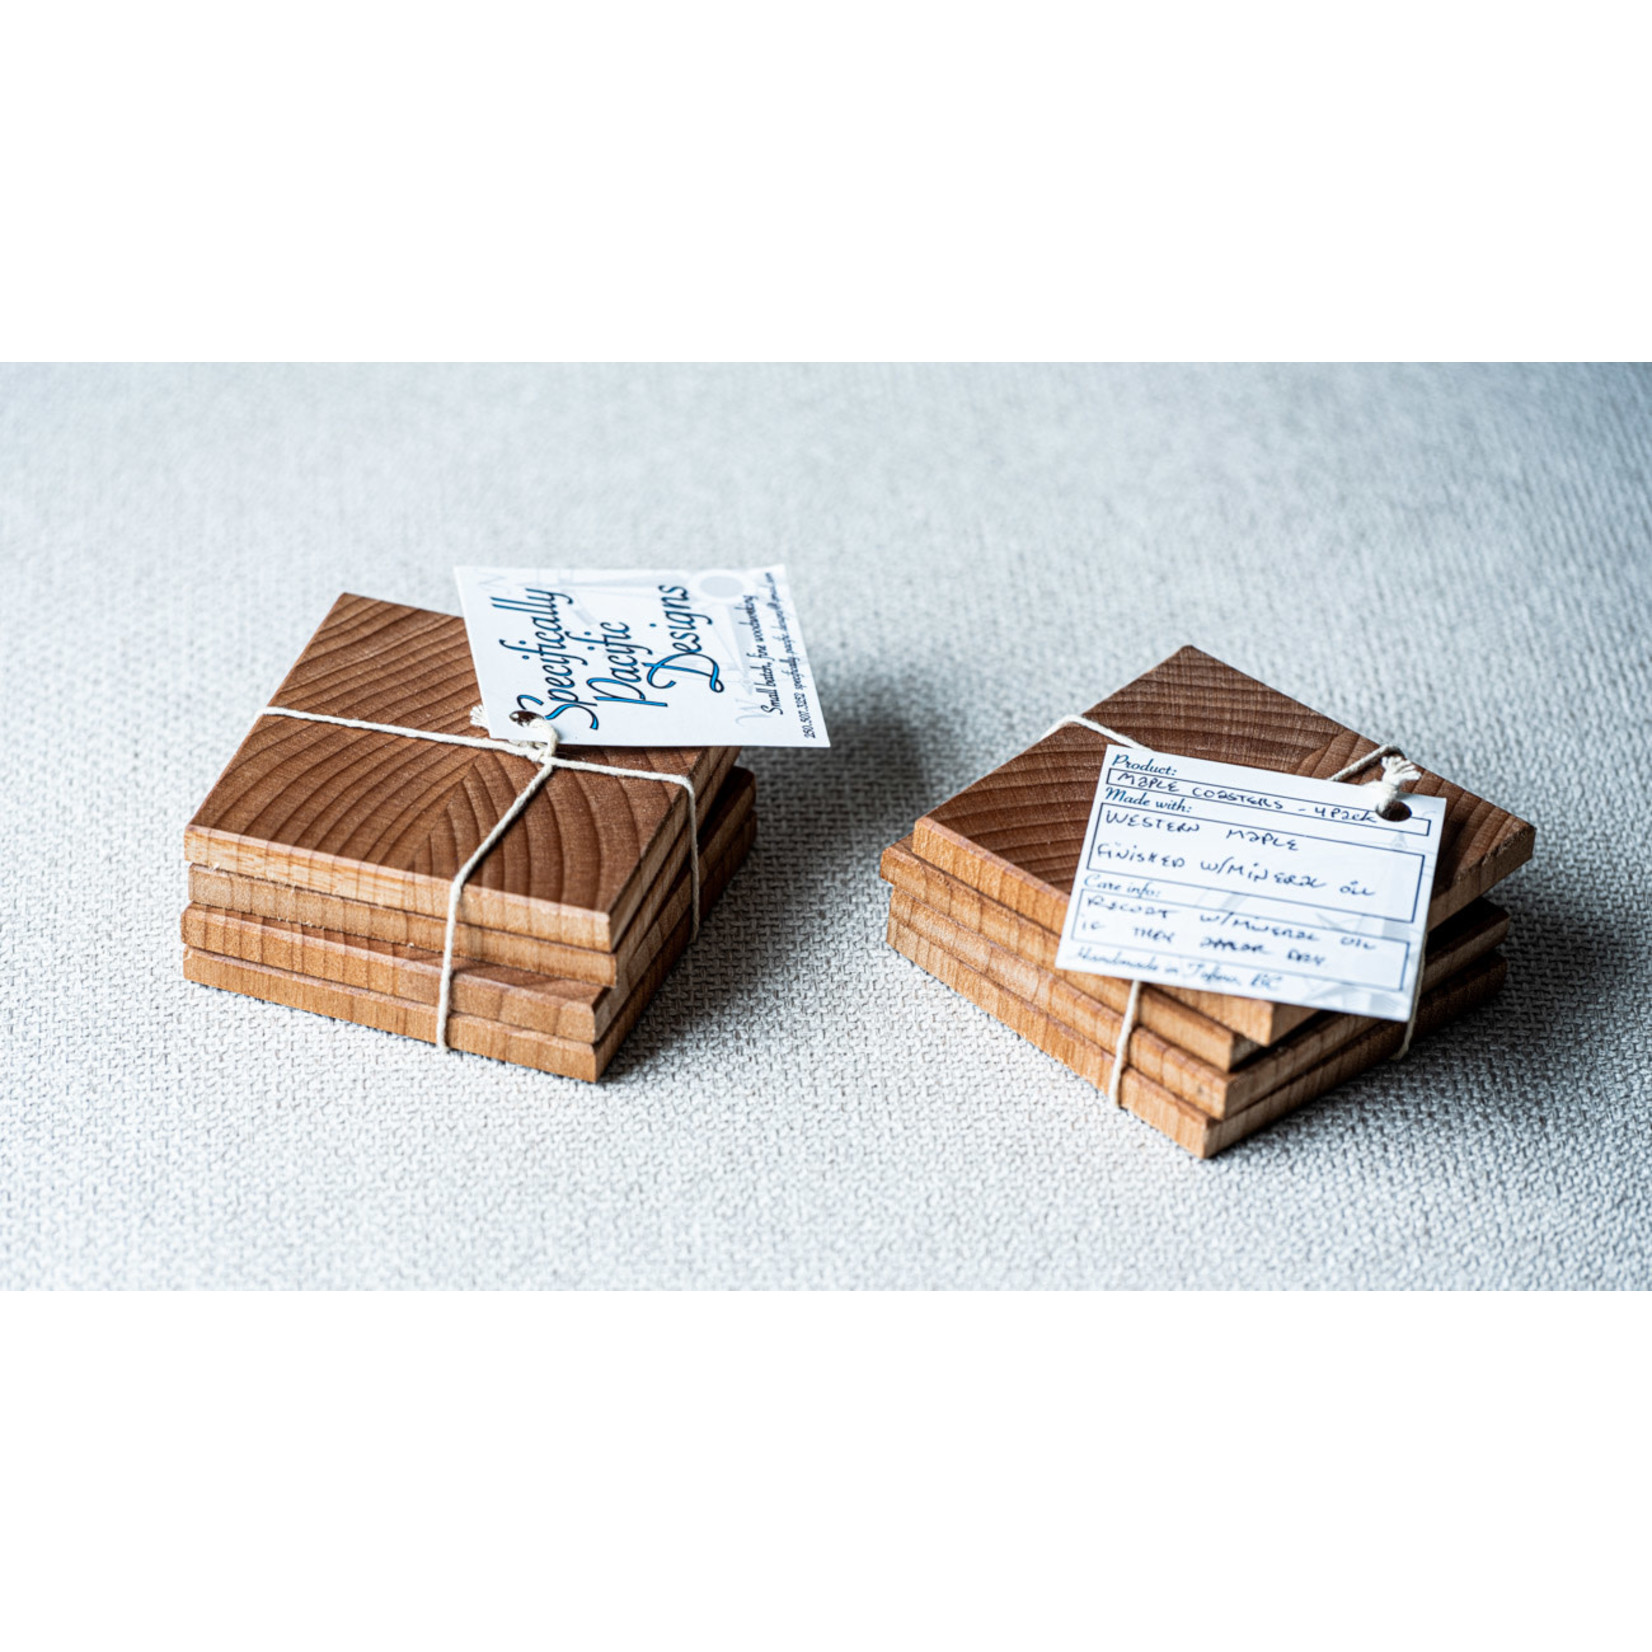 Specifically Pacific Designs Maple Wooden Coaster Set of 4